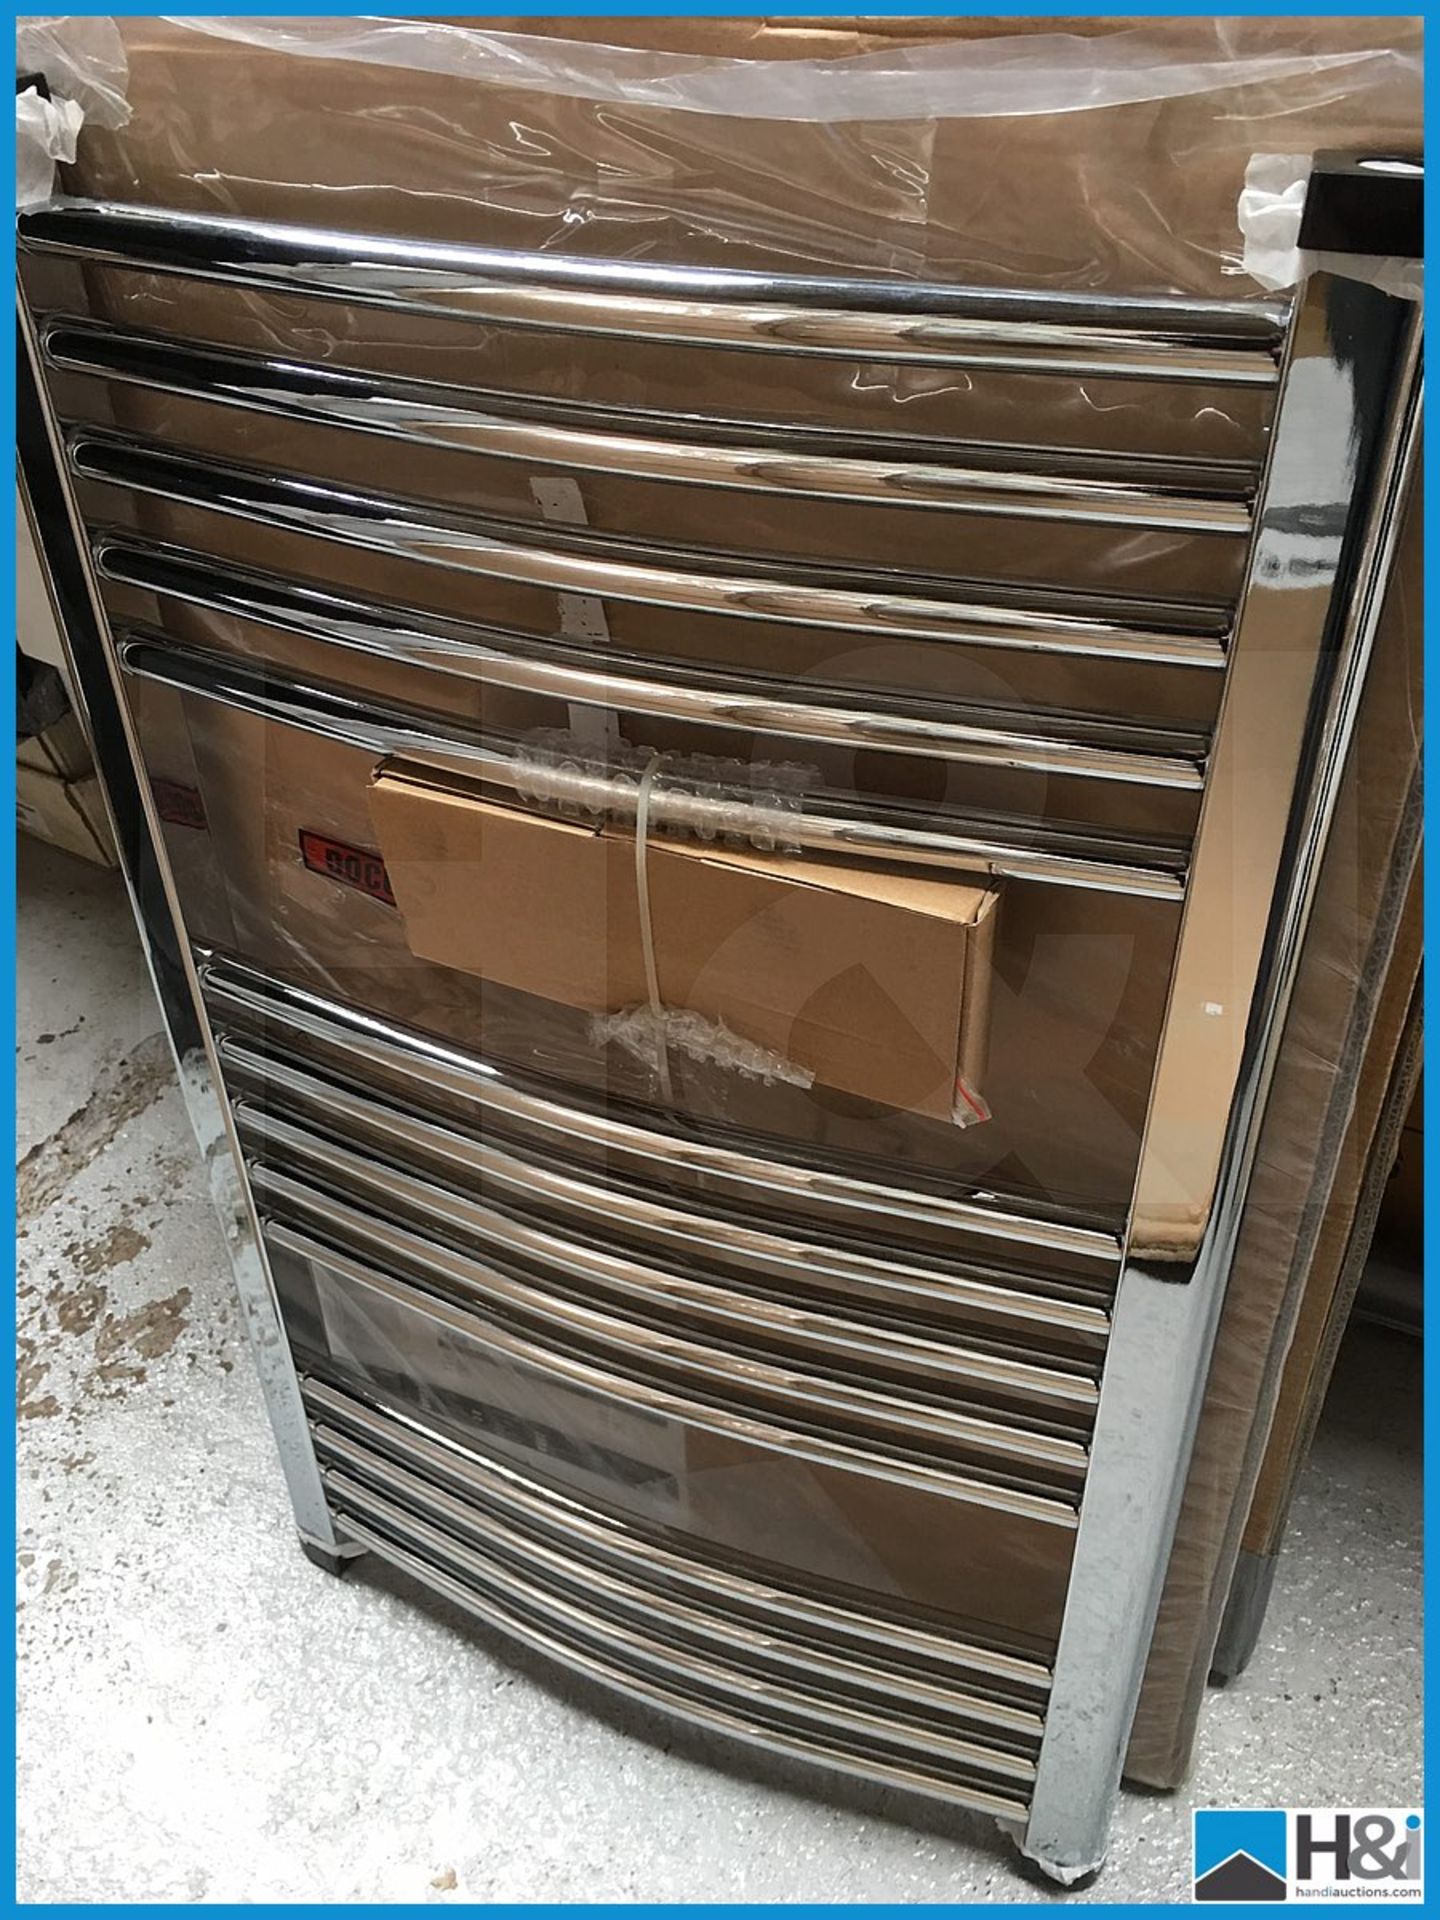 Designer polished chrome 800x500 curved towel rail. Complete with fittings. New and boxed. Suggested